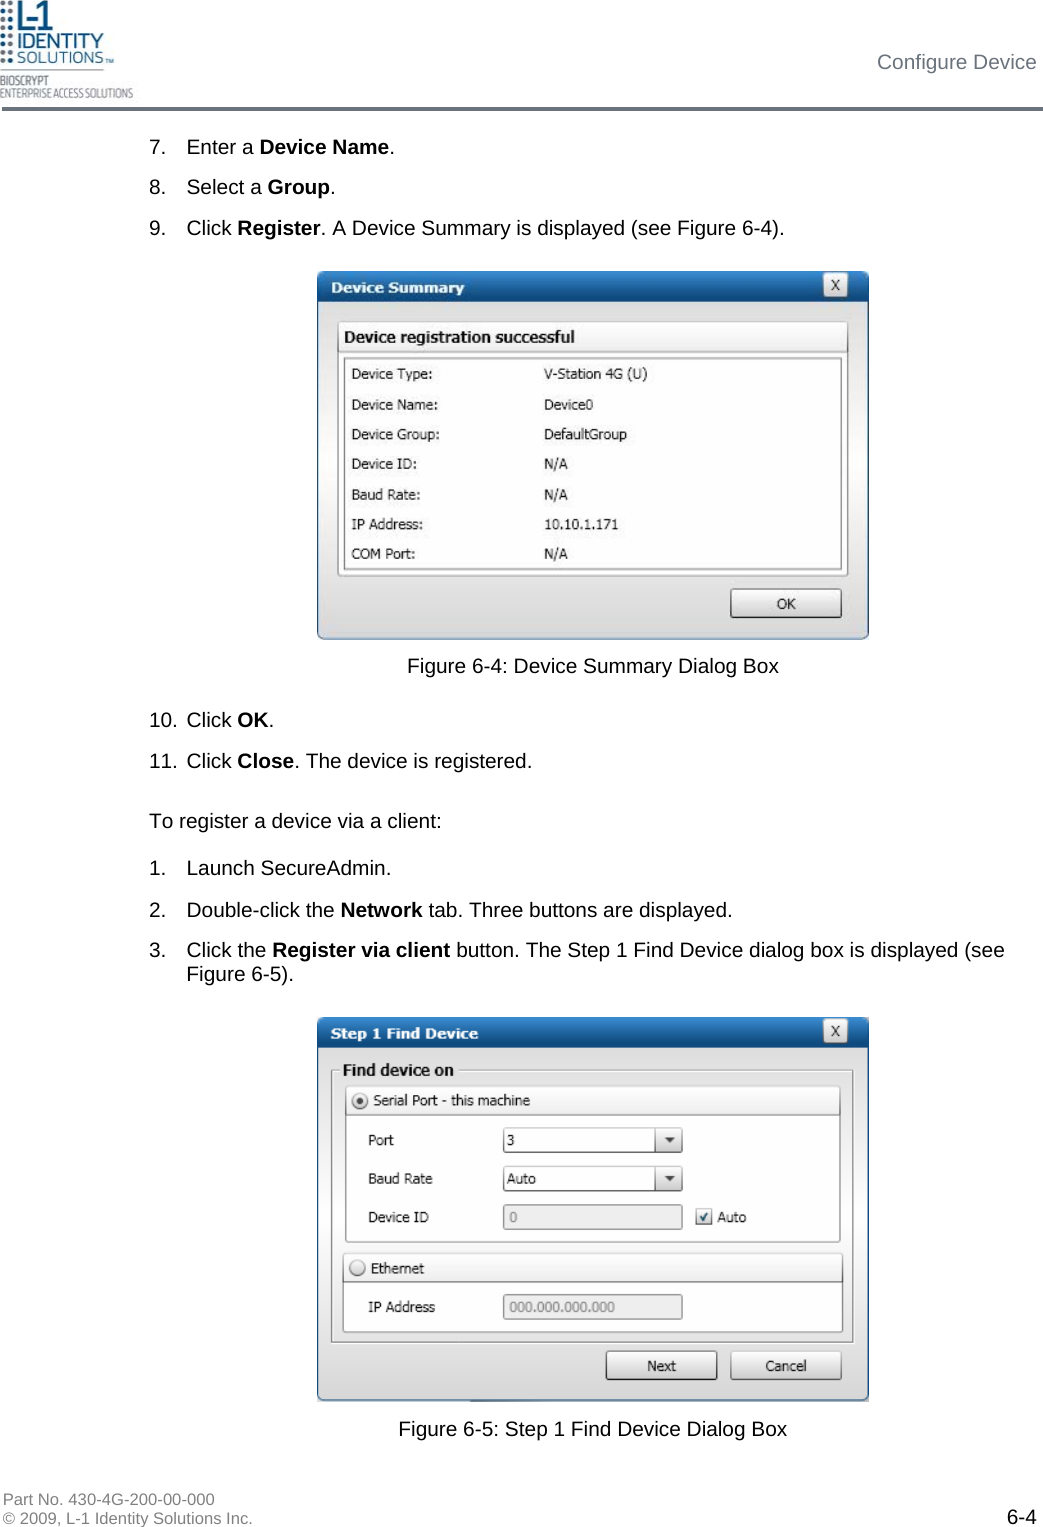 Configure Device Part No. 430-4G-200-00-000 © 2009, L-1 Identity Solutions Inc.  6-4 7. Enter a Device Name. 8. Select a Group. 9. Click Register. A Device Summary is displayed (see Figure 6-4). 10. Click OK. 11. Click Close. The device is registered. To register a device via a client:  1. Launch SecureAdmin. 2. Double-click the Network tab. Three buttons are displayed. 3. Click the Register via client button. The Step 1 Find Device dialog box is displayed (see Figure 6-5). Figure 6-4: Device Summary Dialog Box Figure 6-5: Step 1 Find Device Dialog Box 